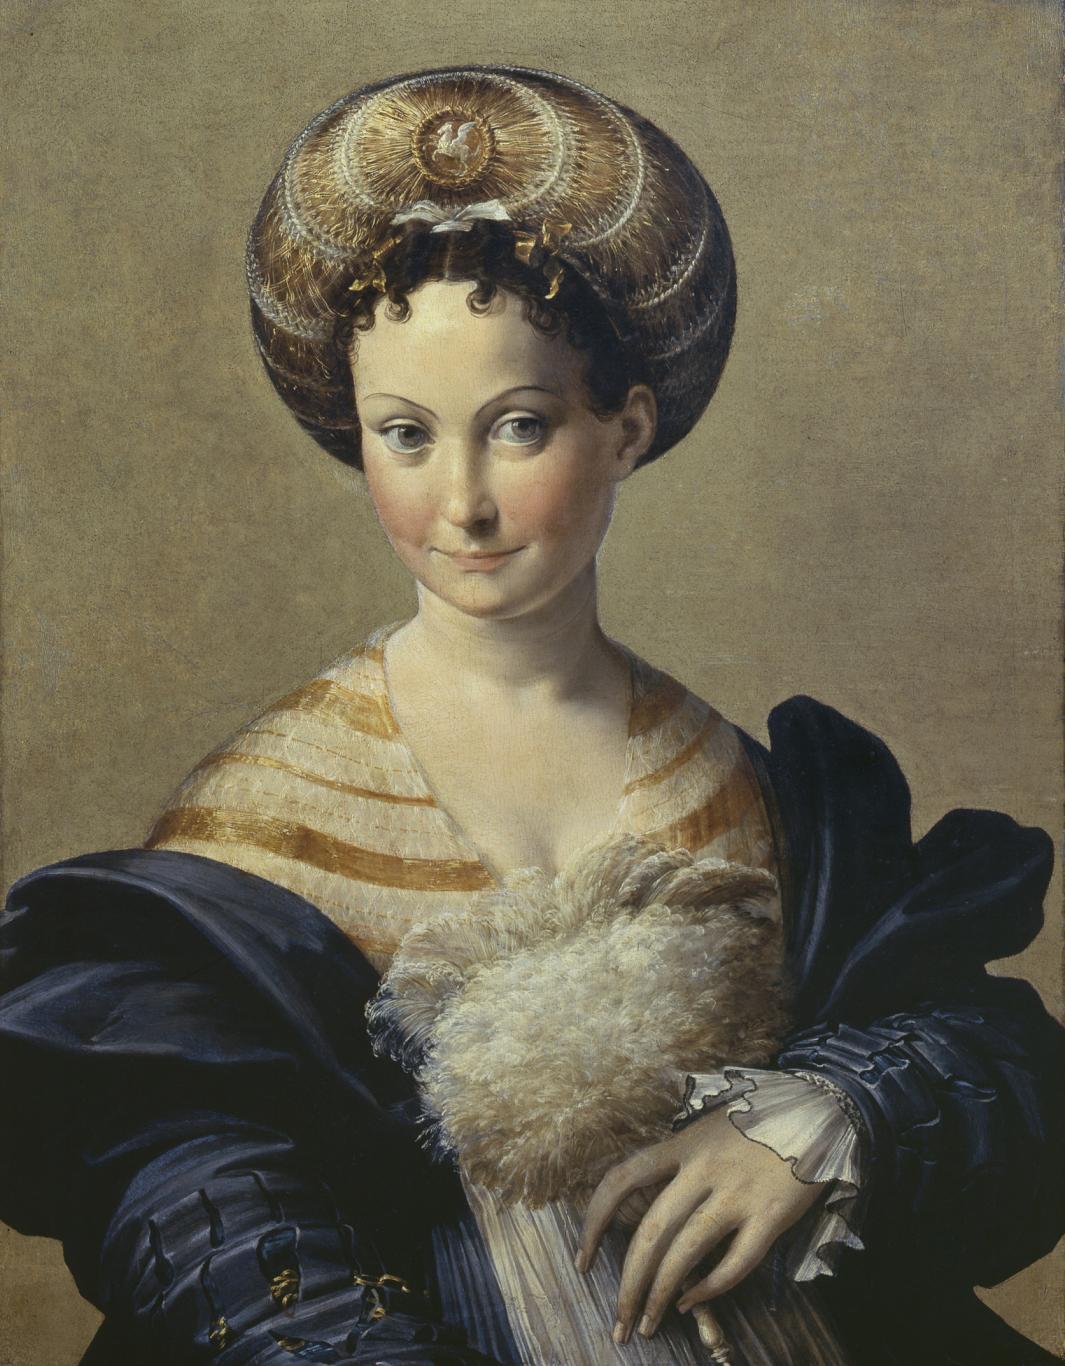 Painting of a half-length woman wearing a round headdress, big blue sleeves, and holding a white fan